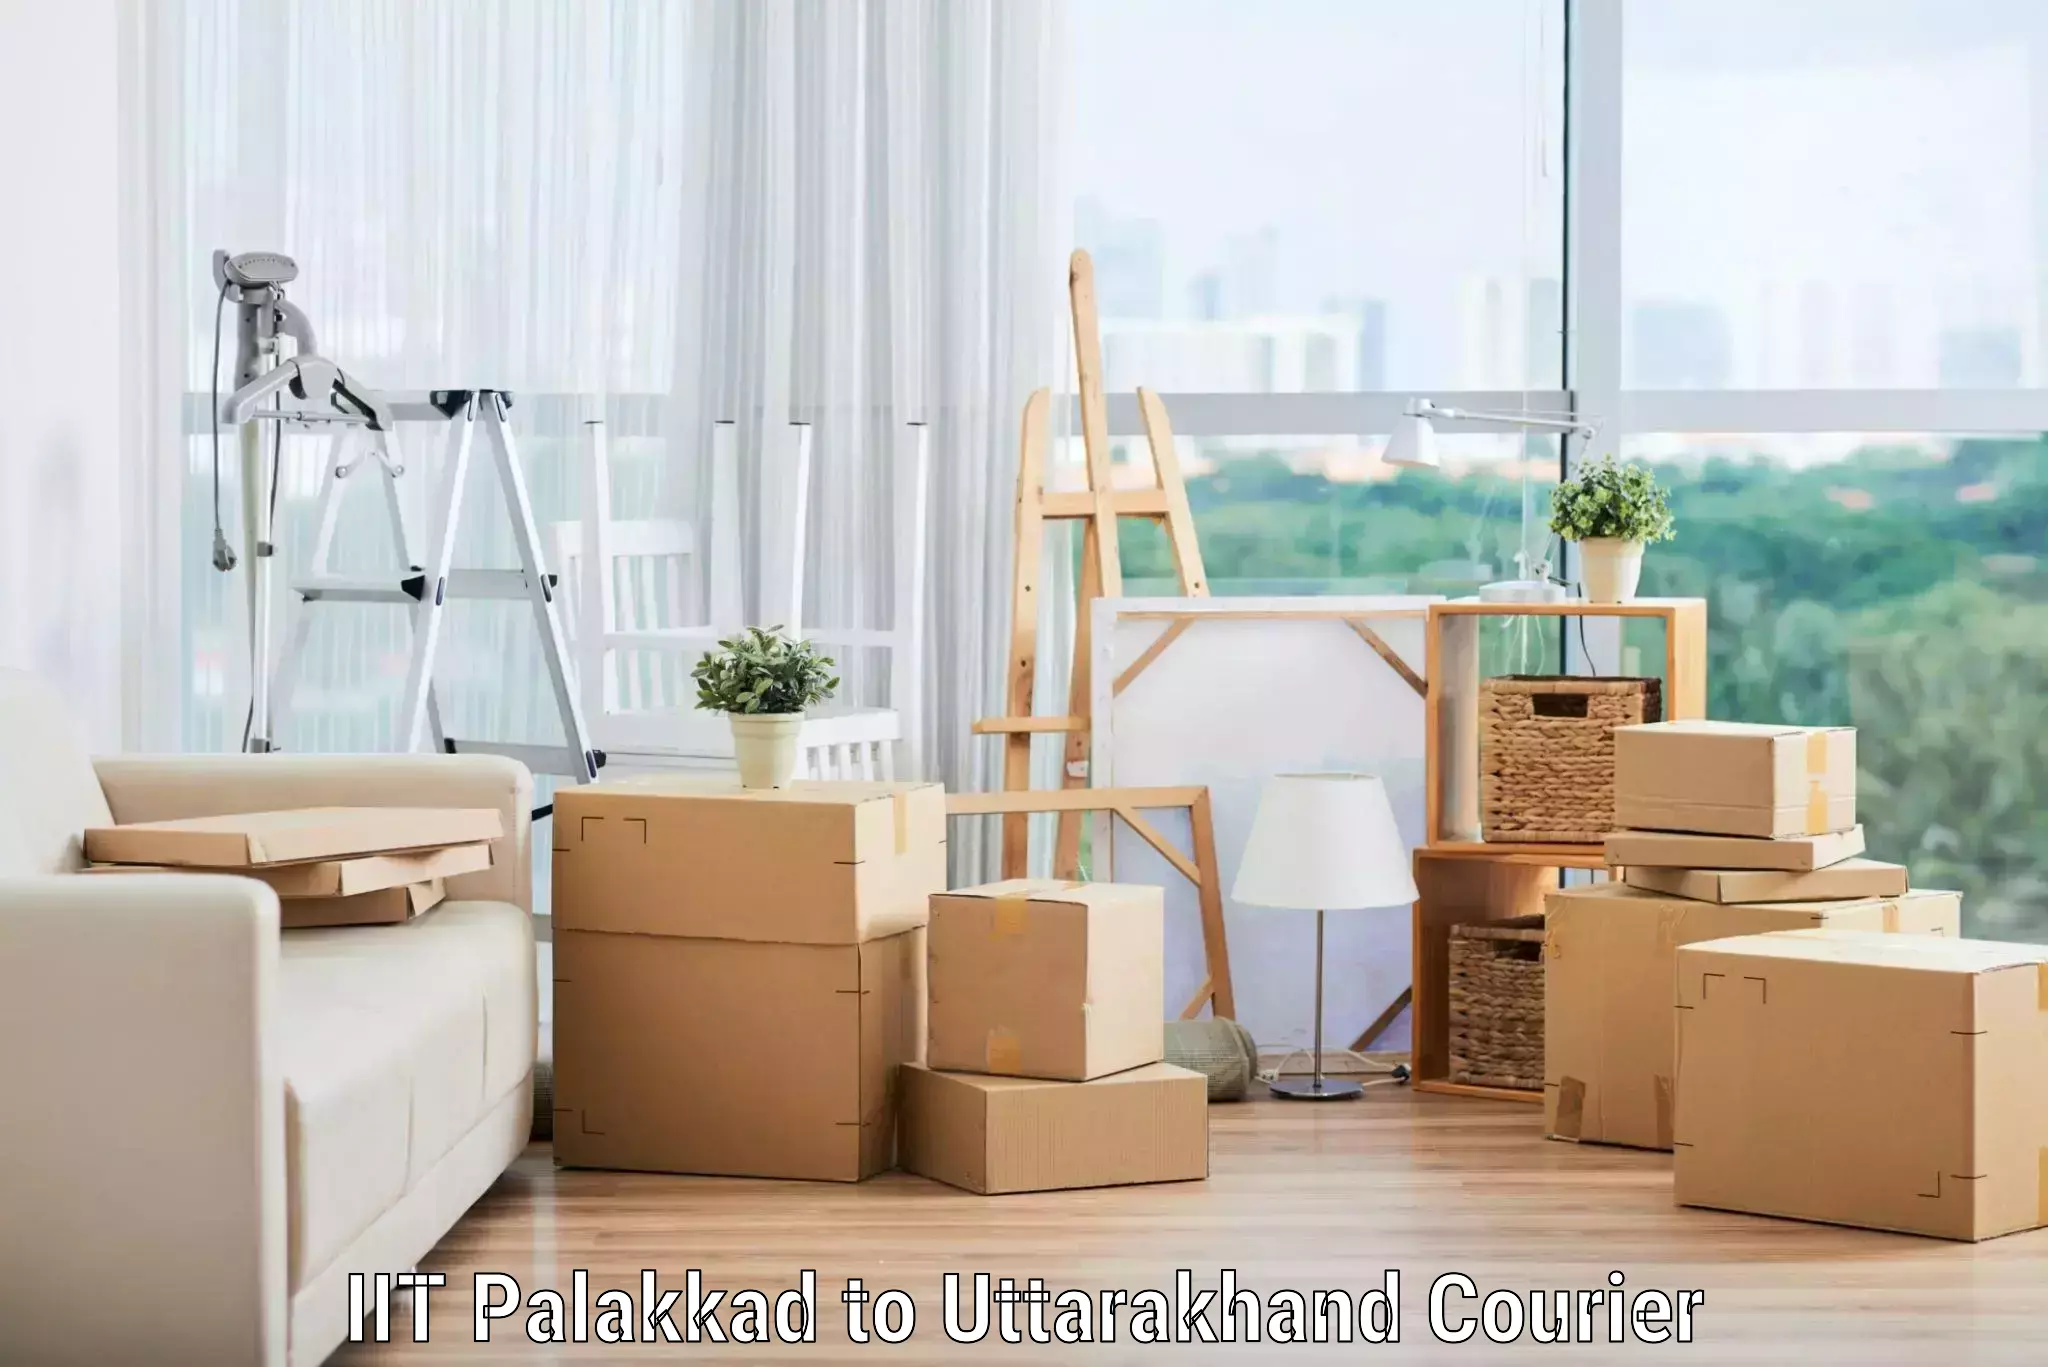 Quality moving services IIT Palakkad to Rishikesh